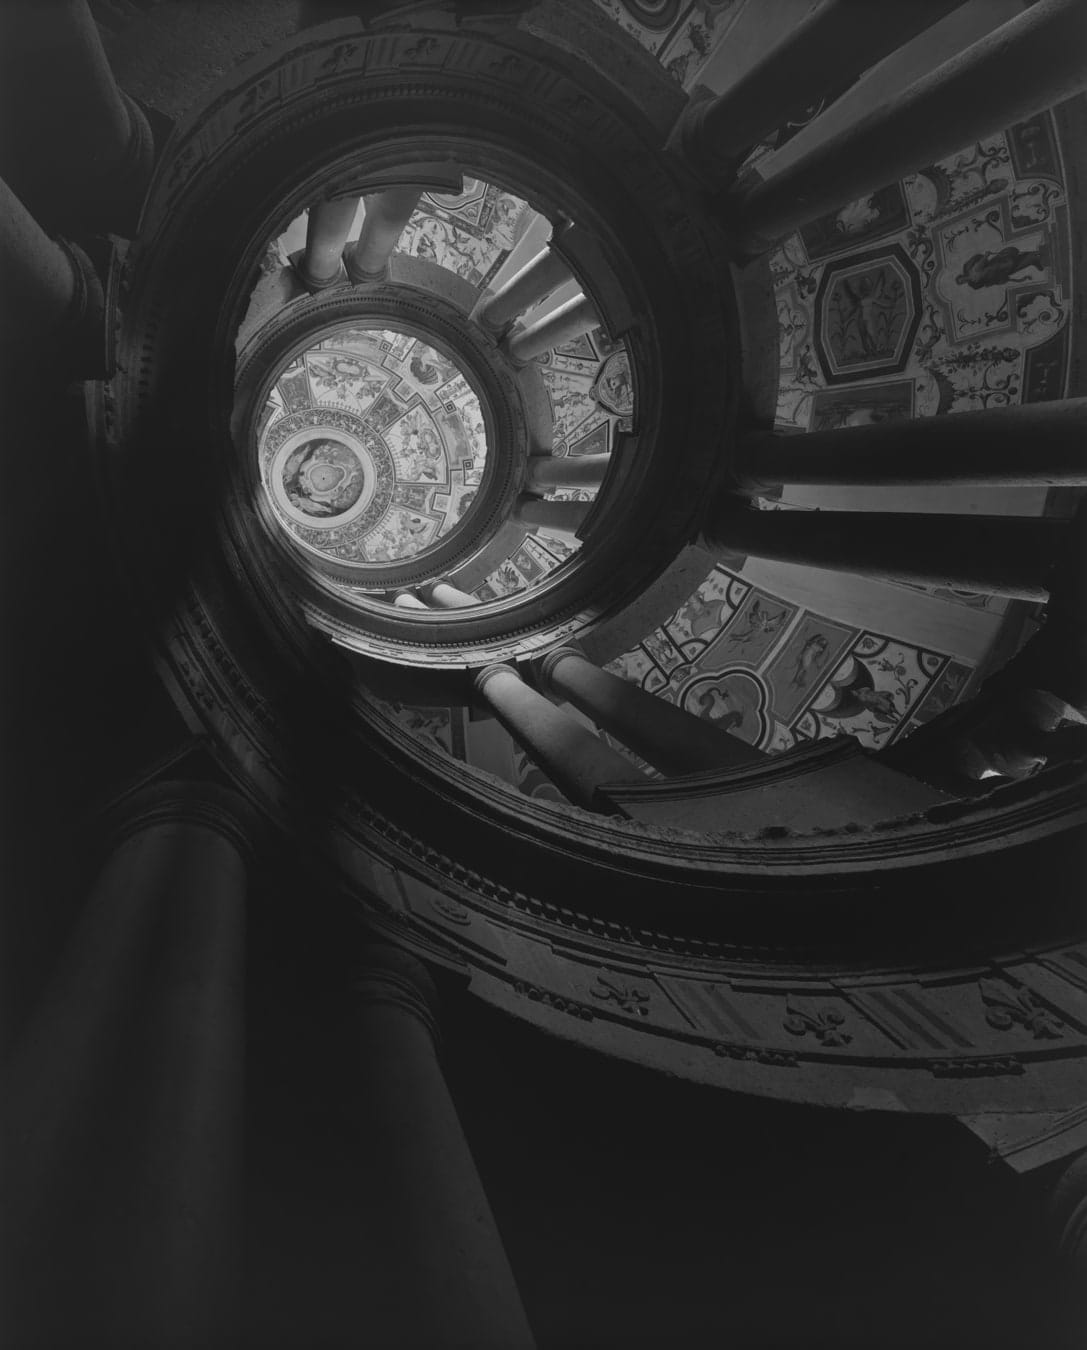 Black and white photograph of an upward view of a circular architectural spire with columns and fresco paintings in the grotesque style. 